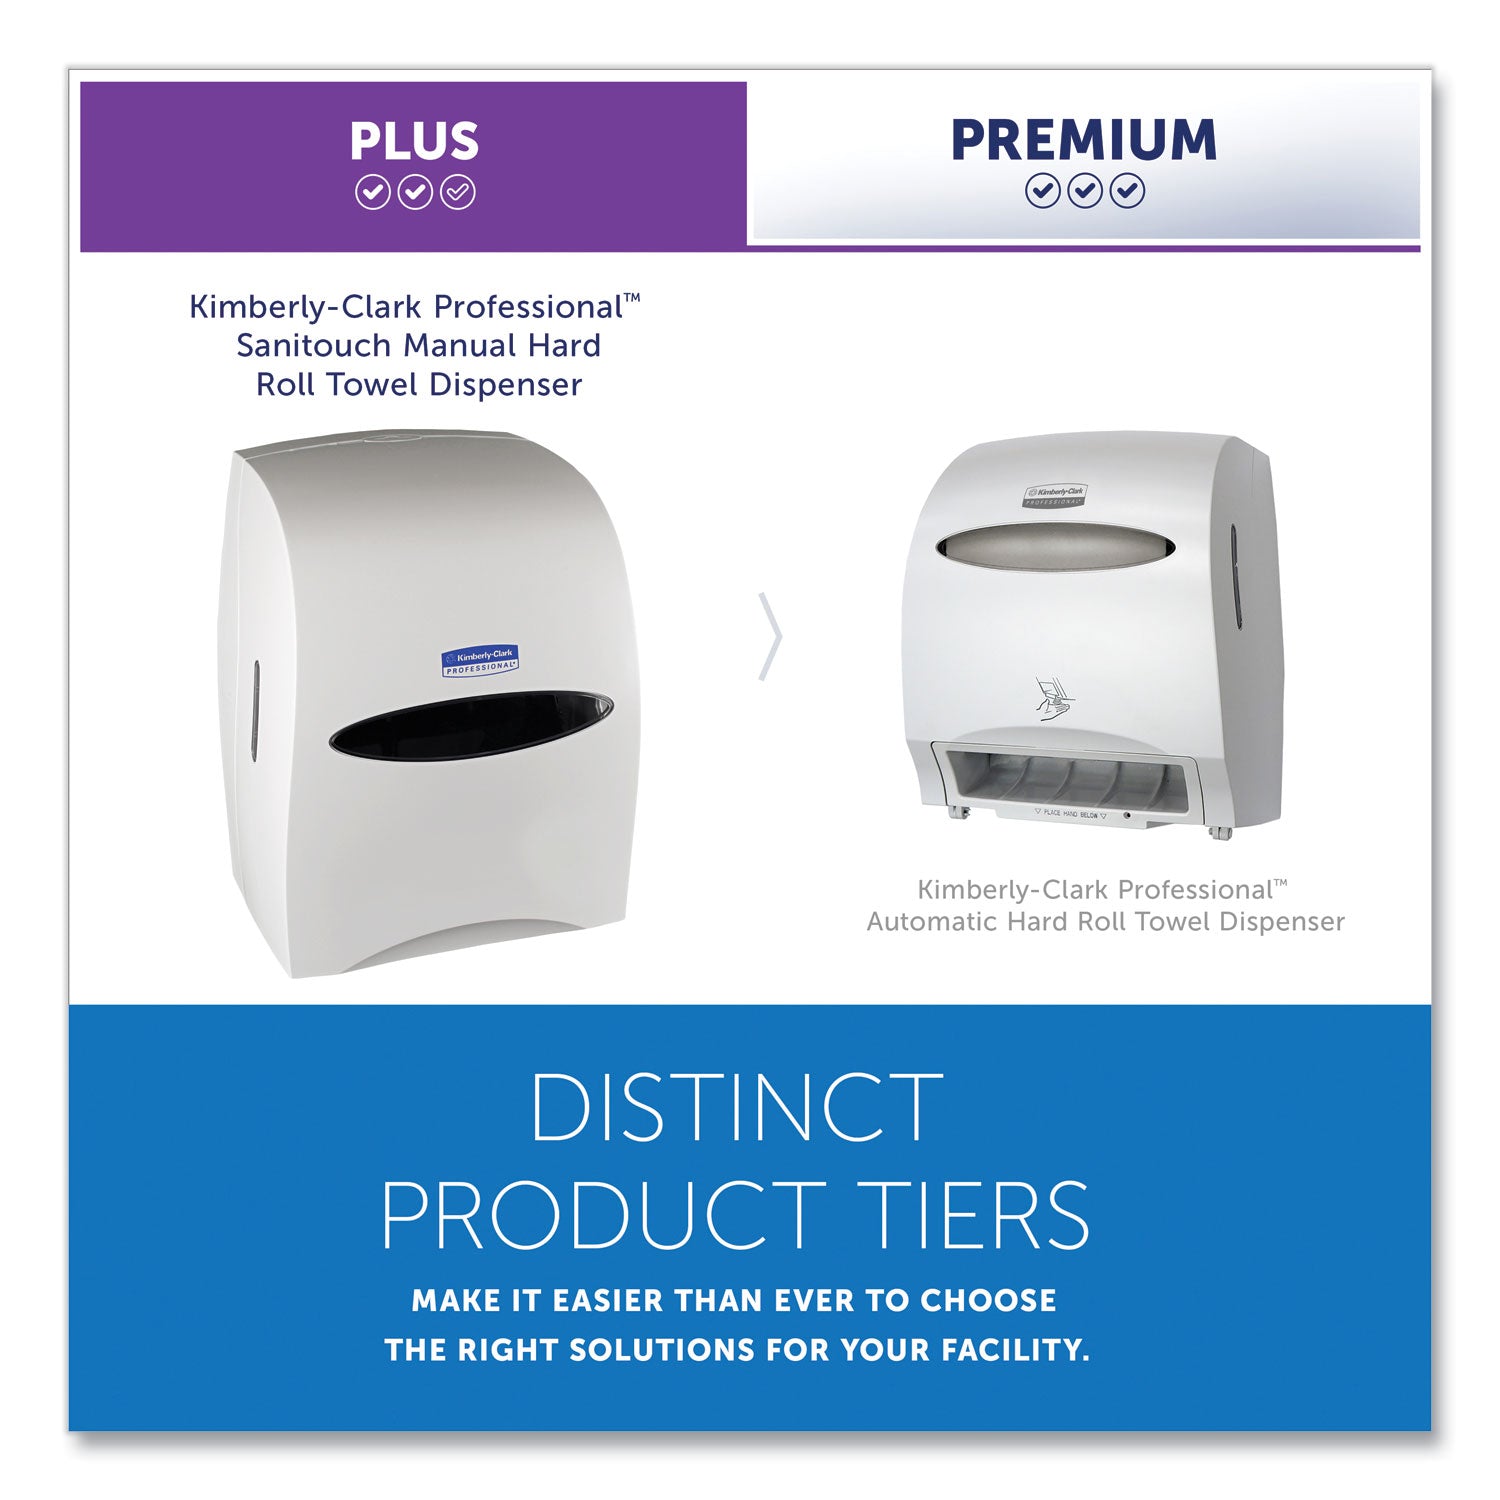 sanitouch-hard-roll-towel-dispenser-1263-x-102-x-1613-white_kcc09995 - 3